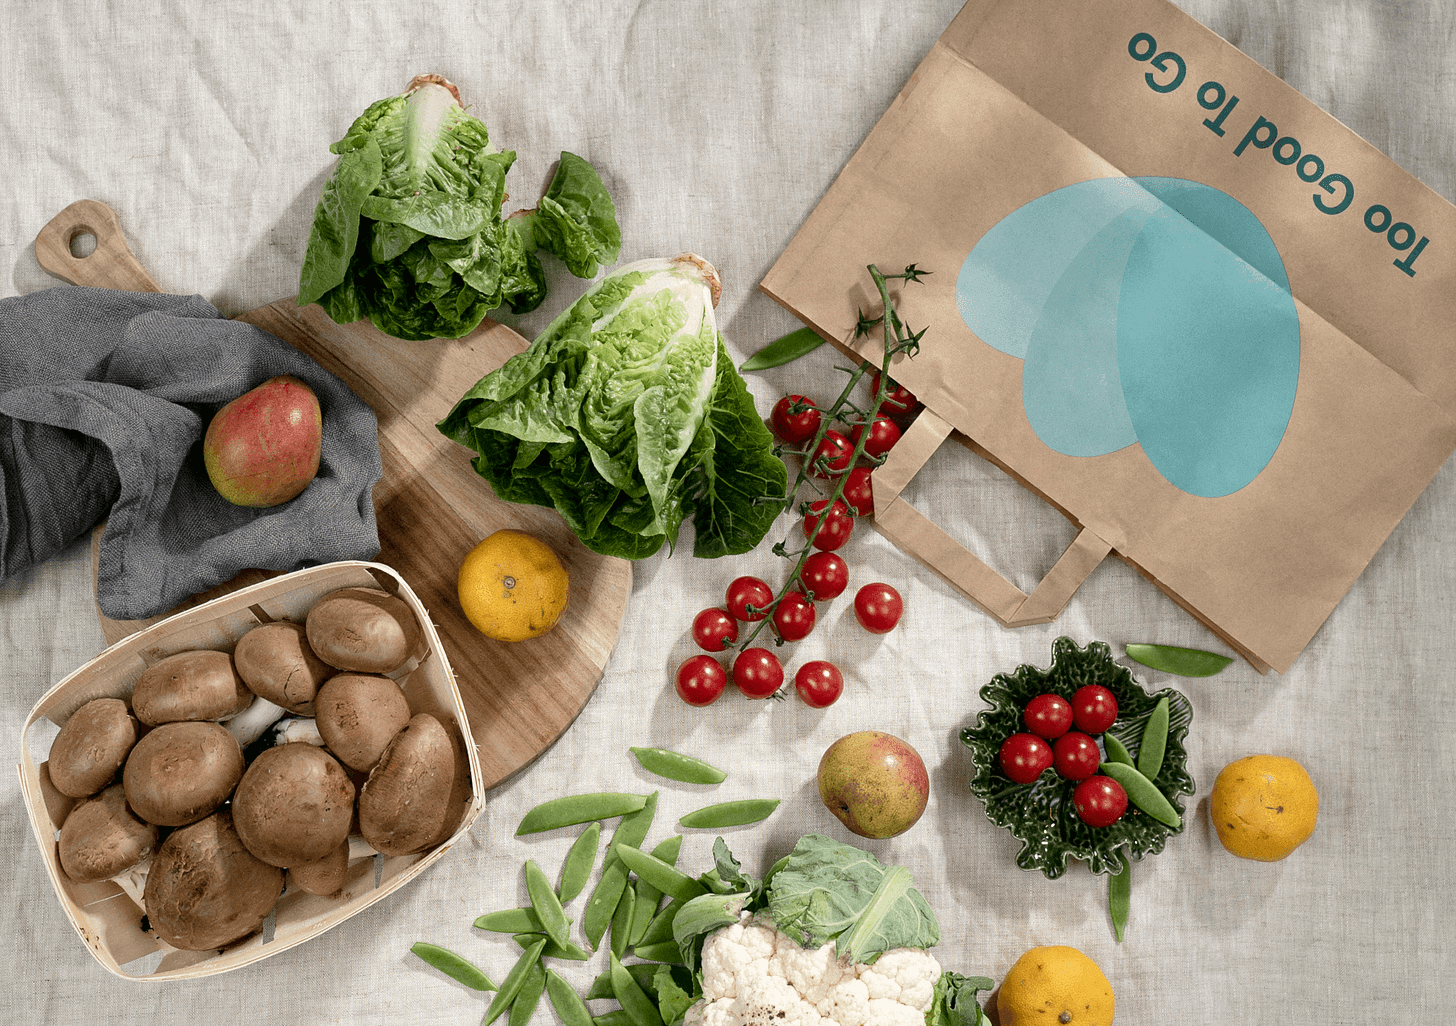 Too Good To Go aims to tackle food waste head-on by raising awareness and encouraging sustainable consumption habits. With this app, you can save food and money.